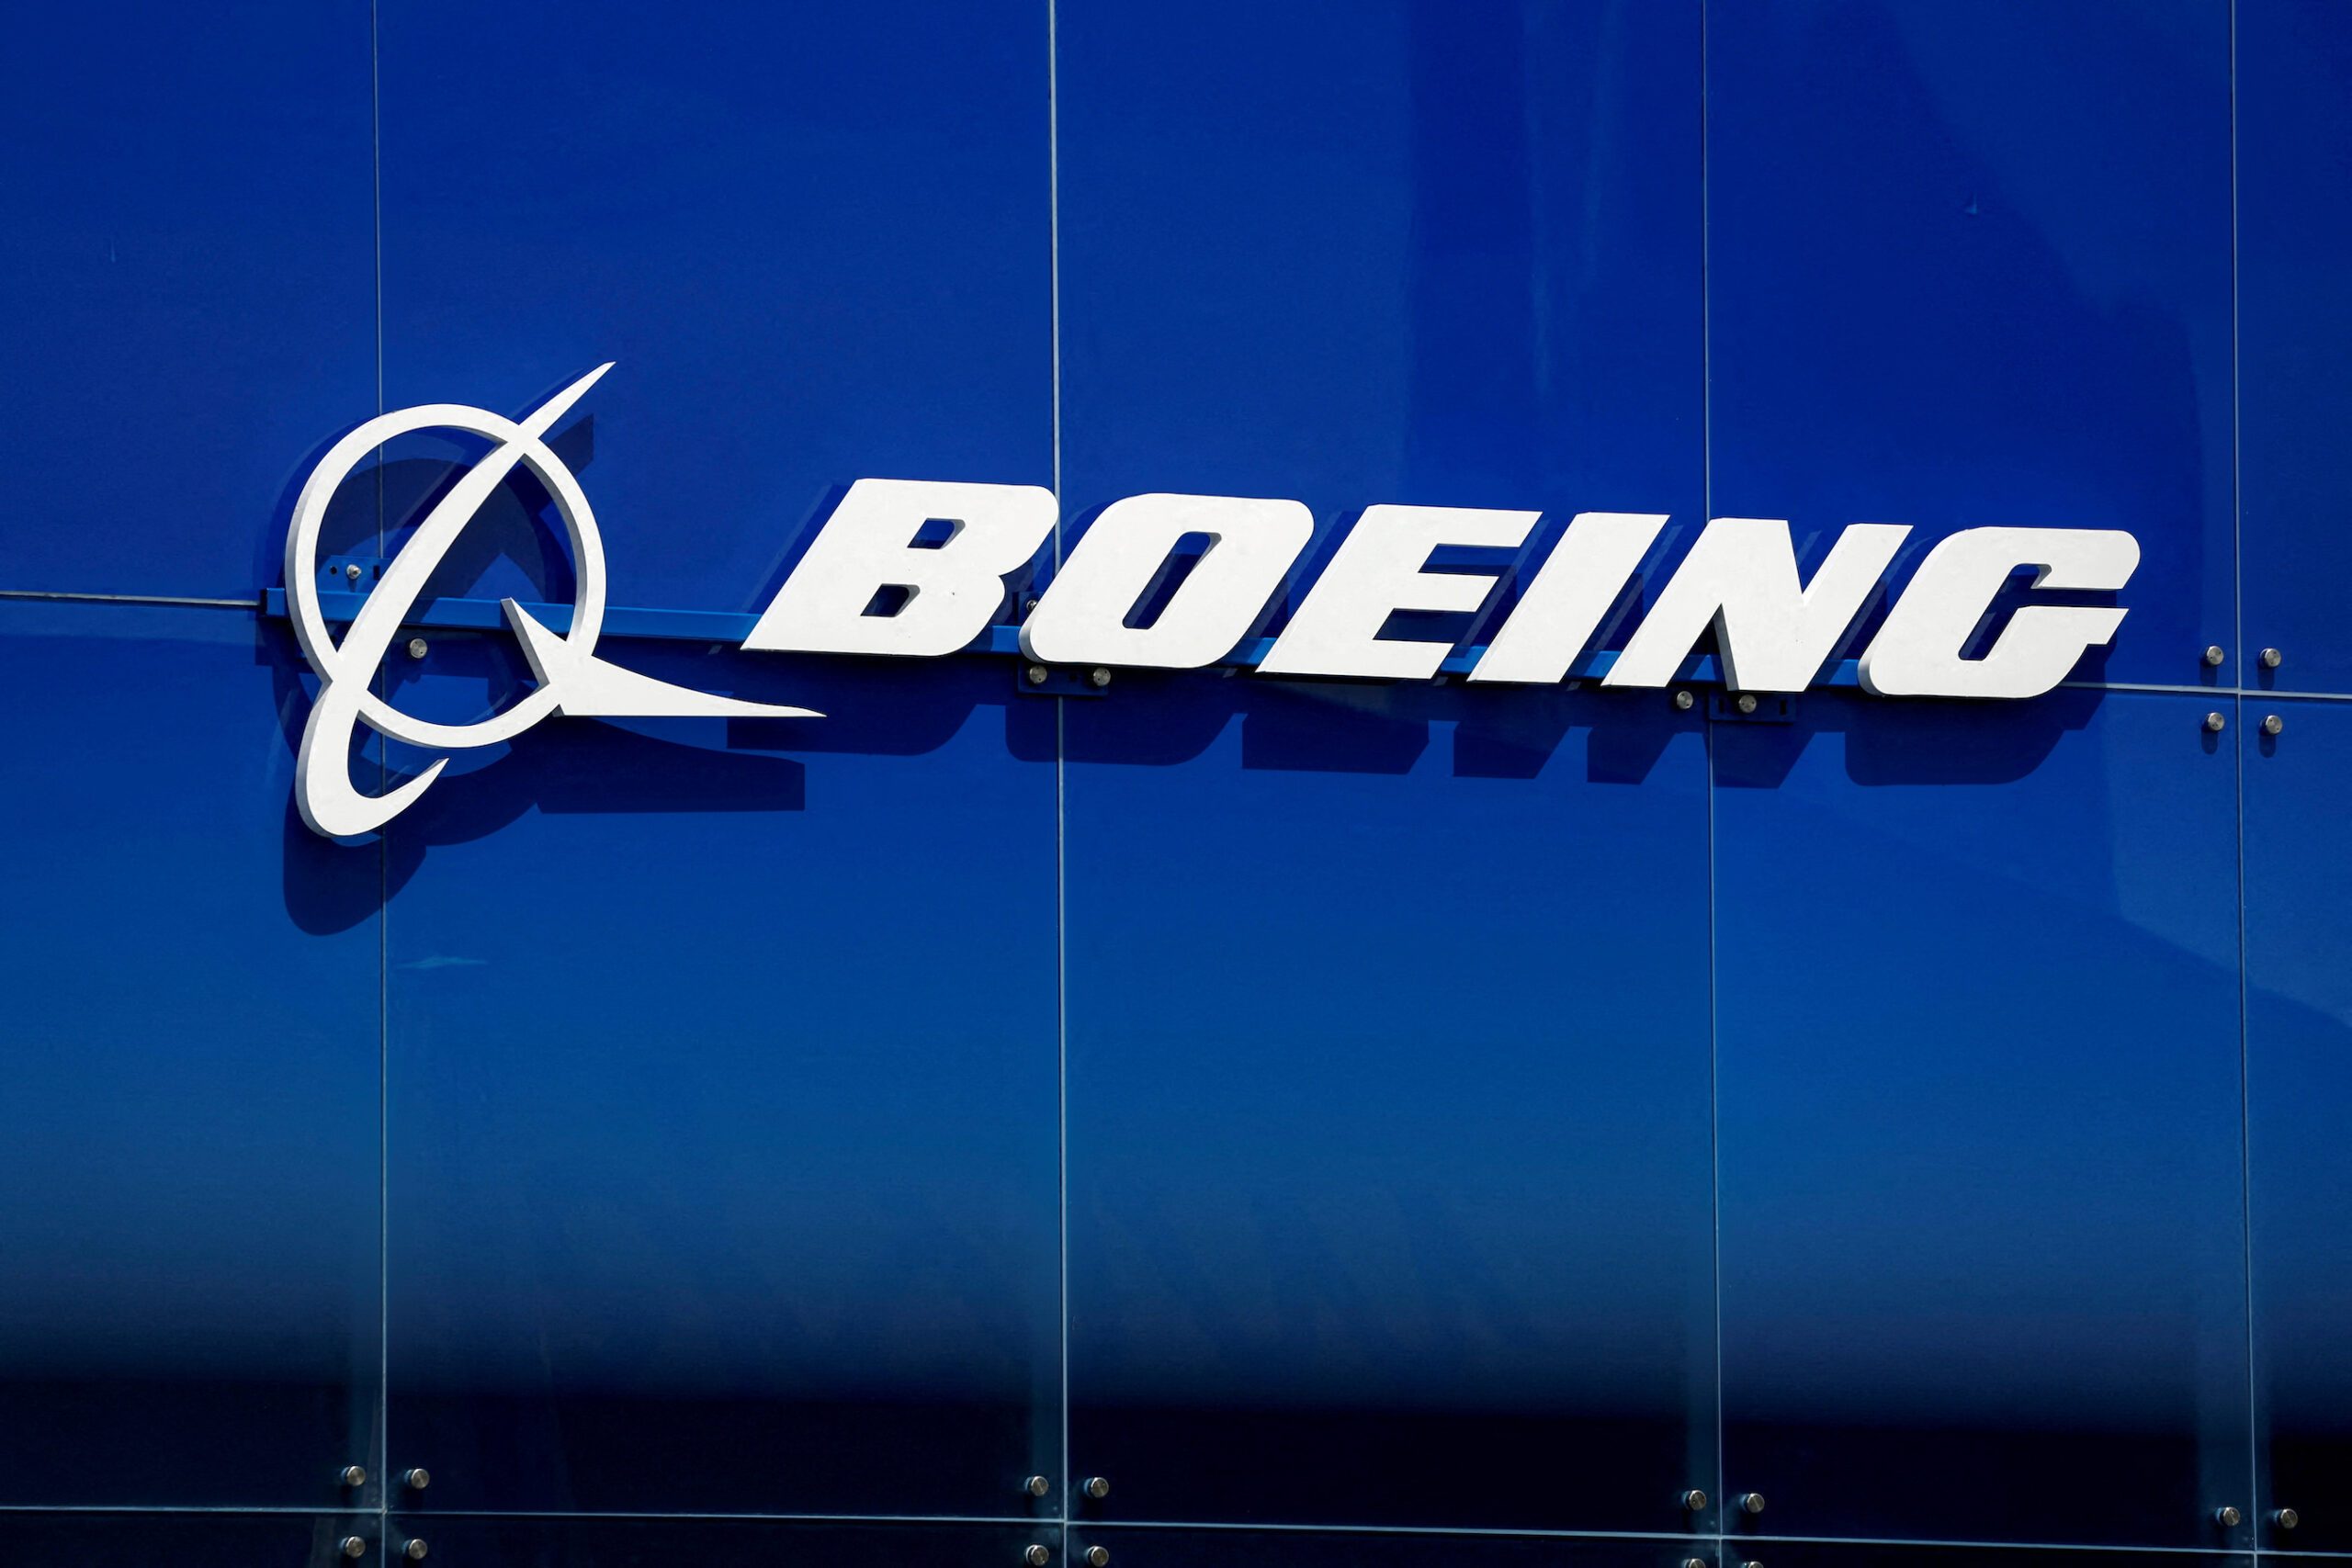 Boeing says ‘cyber incident’ hit parts business after ransom threat